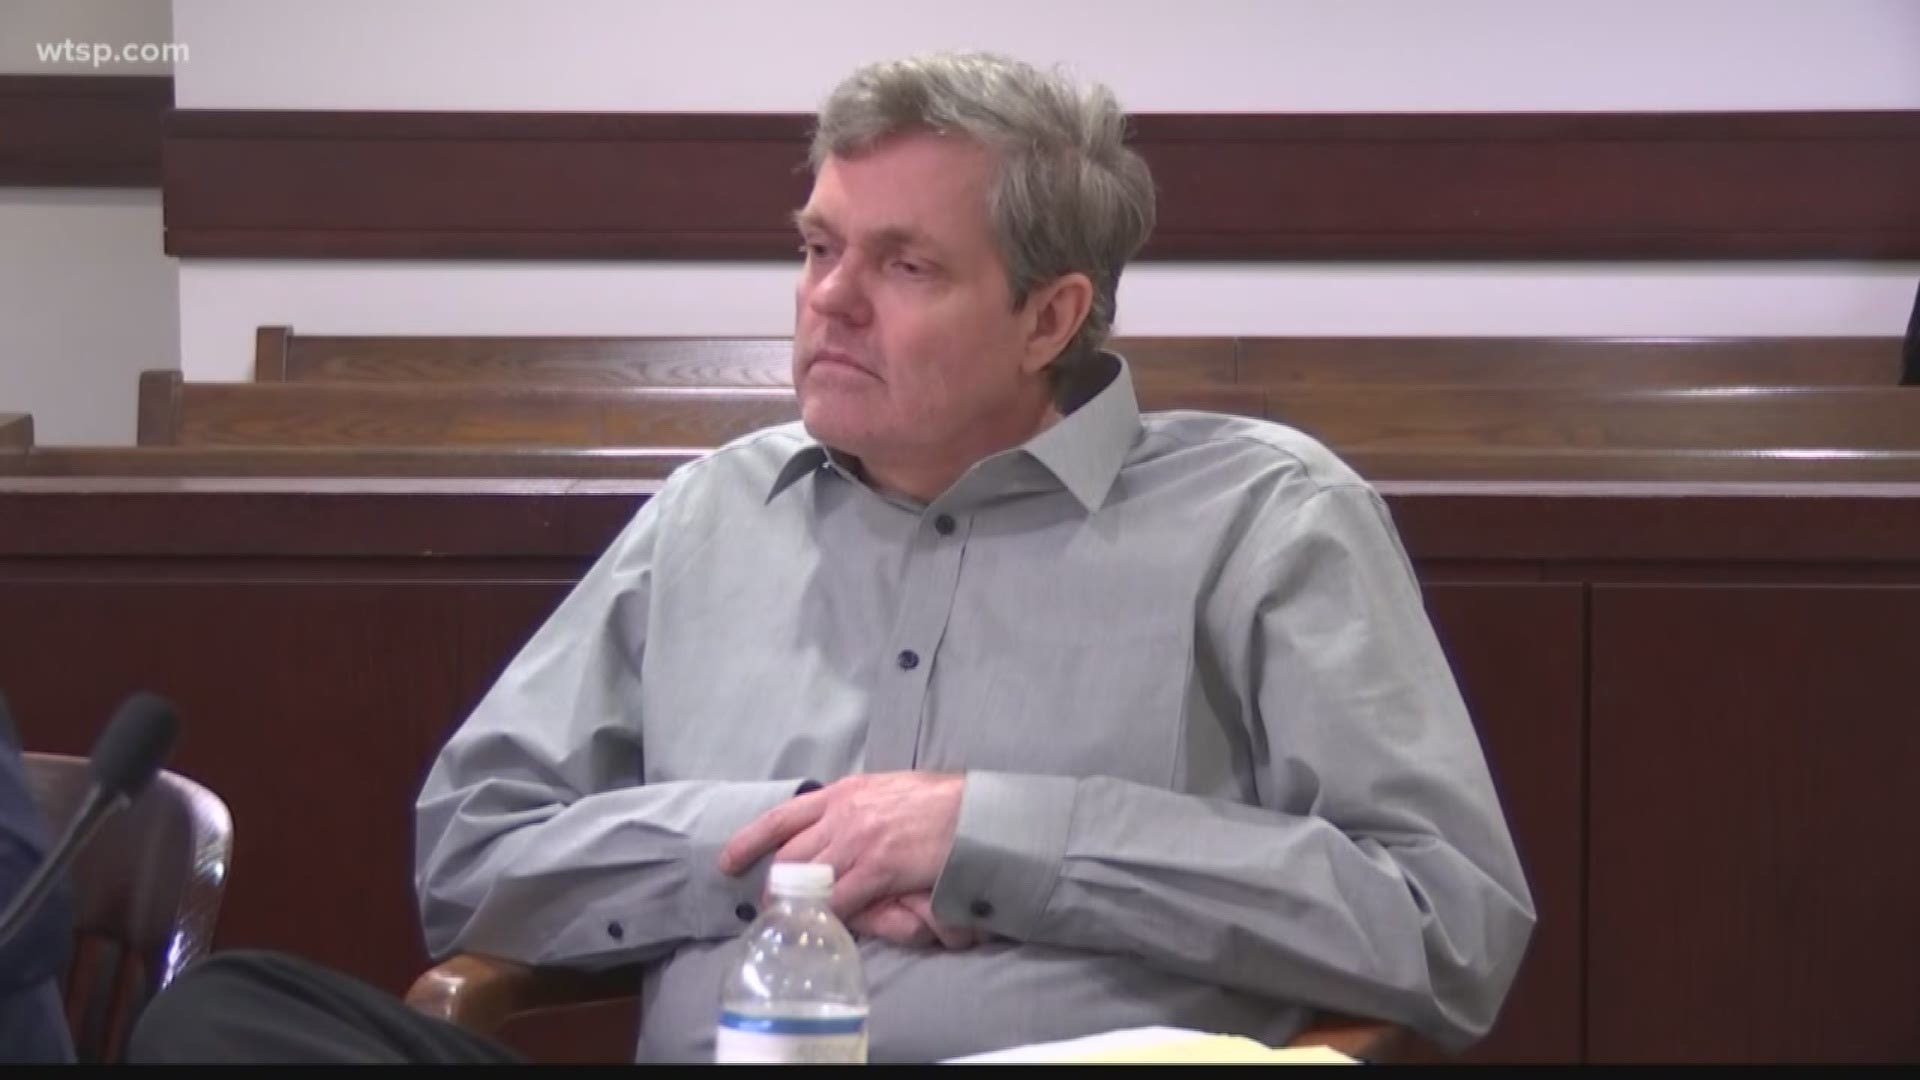 Michael Keetley is on trial for the murders of two people and the shooting of four others. He's a former ice cream truck driver.